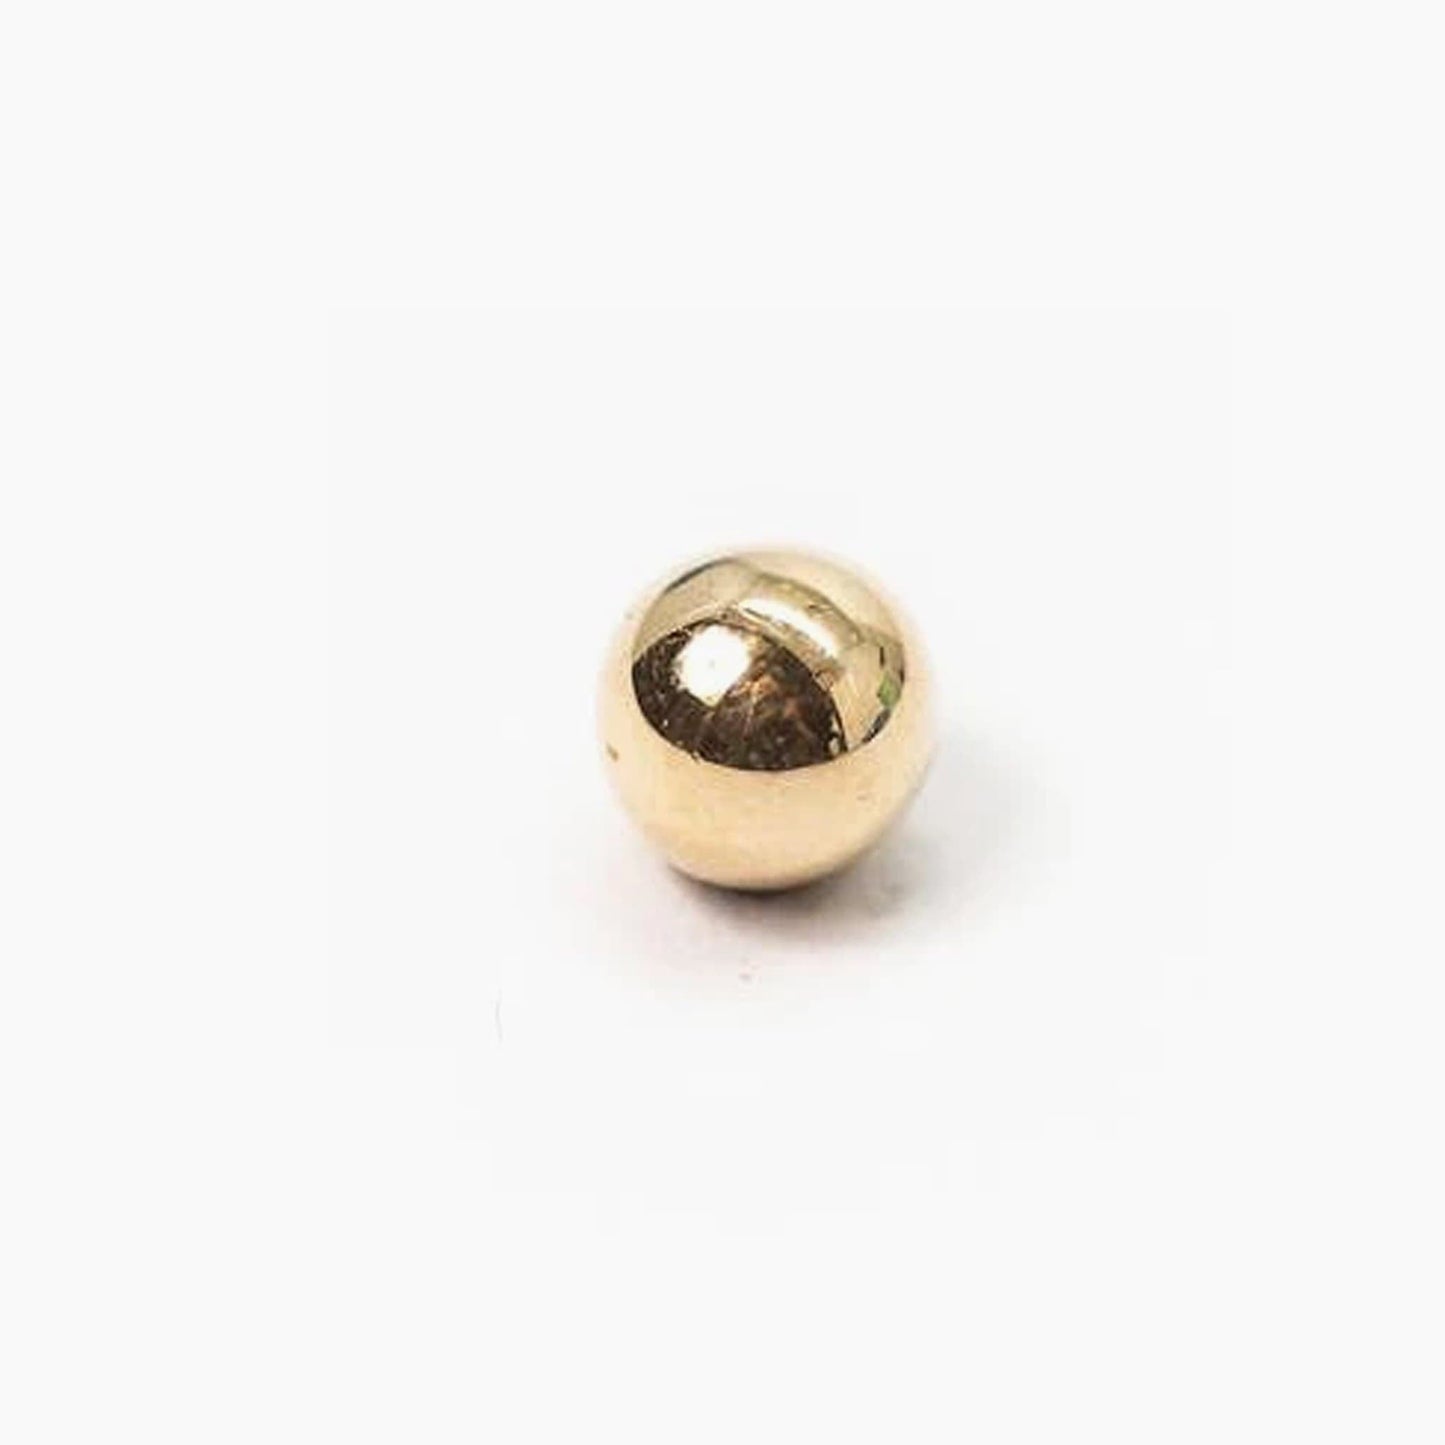 Threaded 14k Replacement Ball Ends